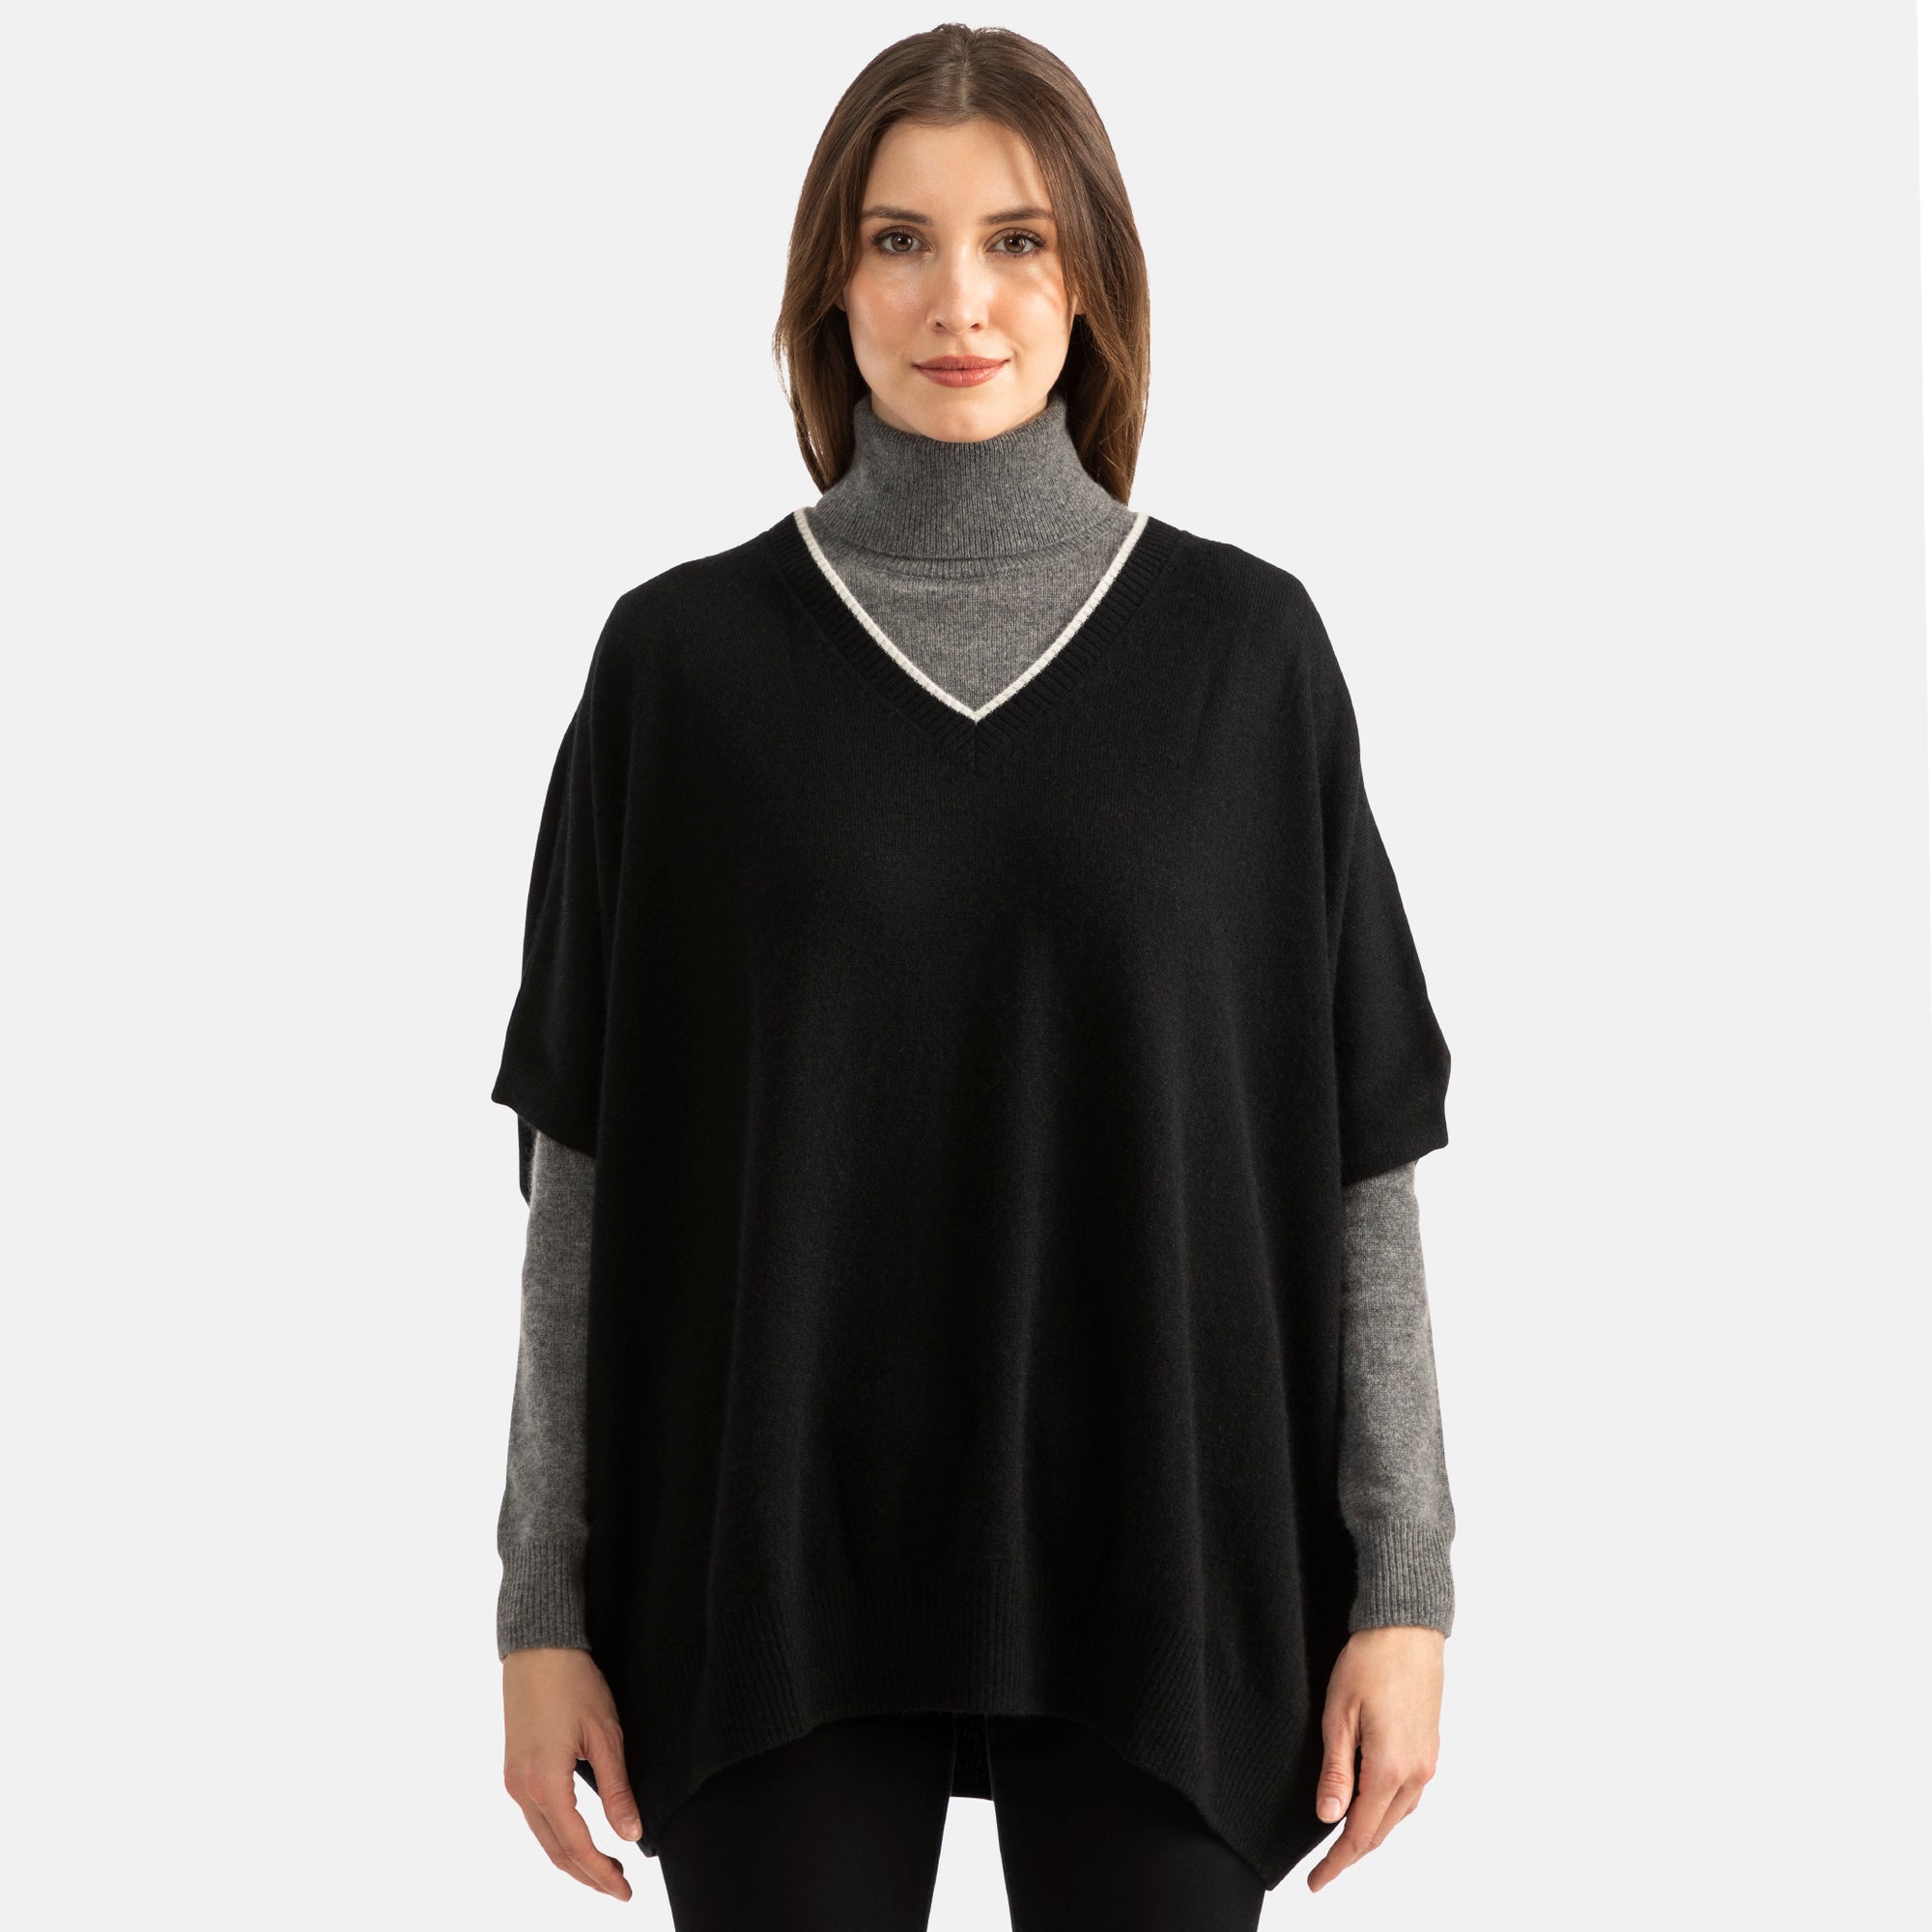 Picture of woman wearing an overhead v-neck ponch with contrast trim in grey with black trim